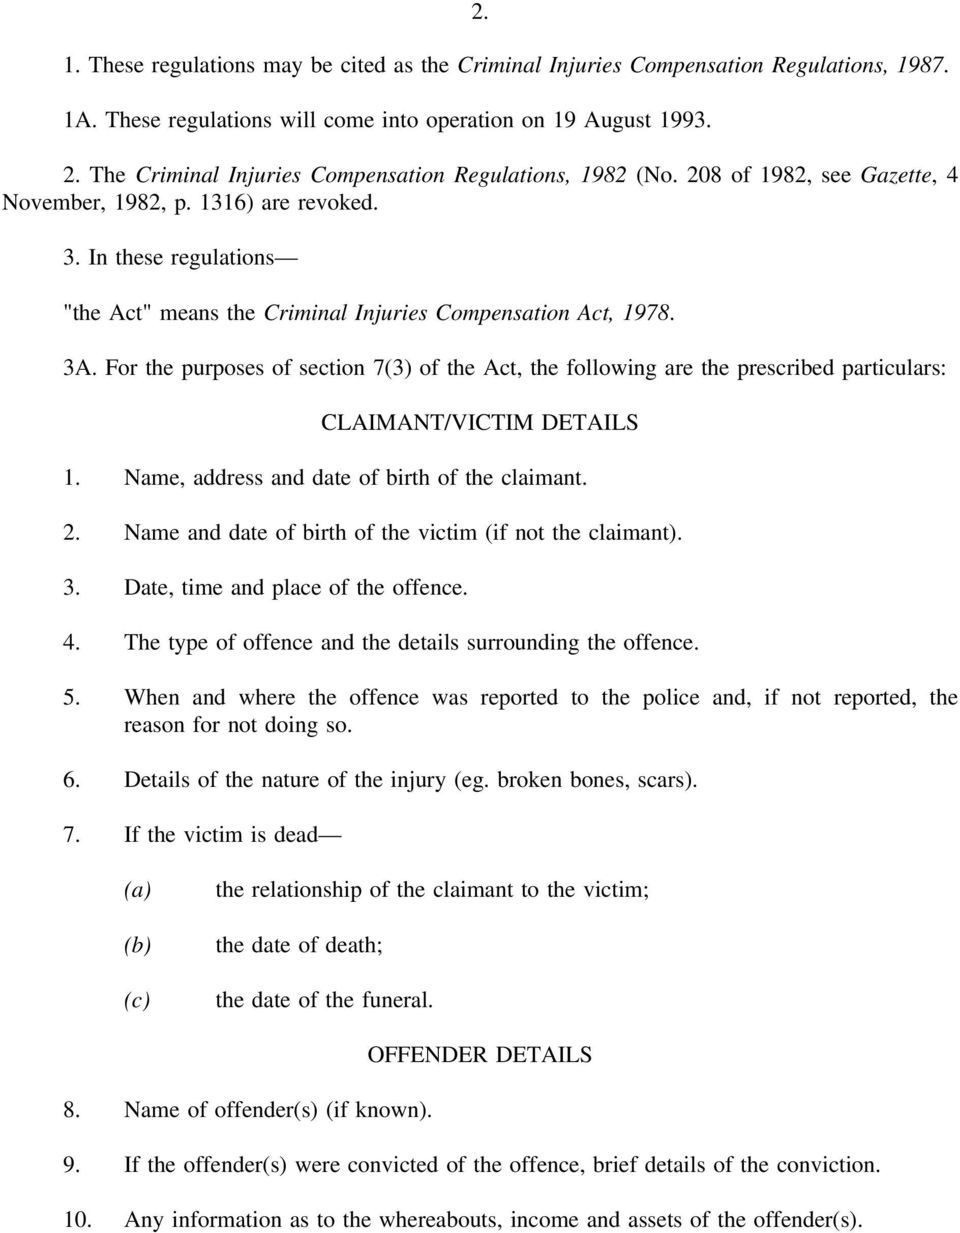 In these regulations "the Act" means the Criminal Injuries Compensation Act, 1978. 3A.